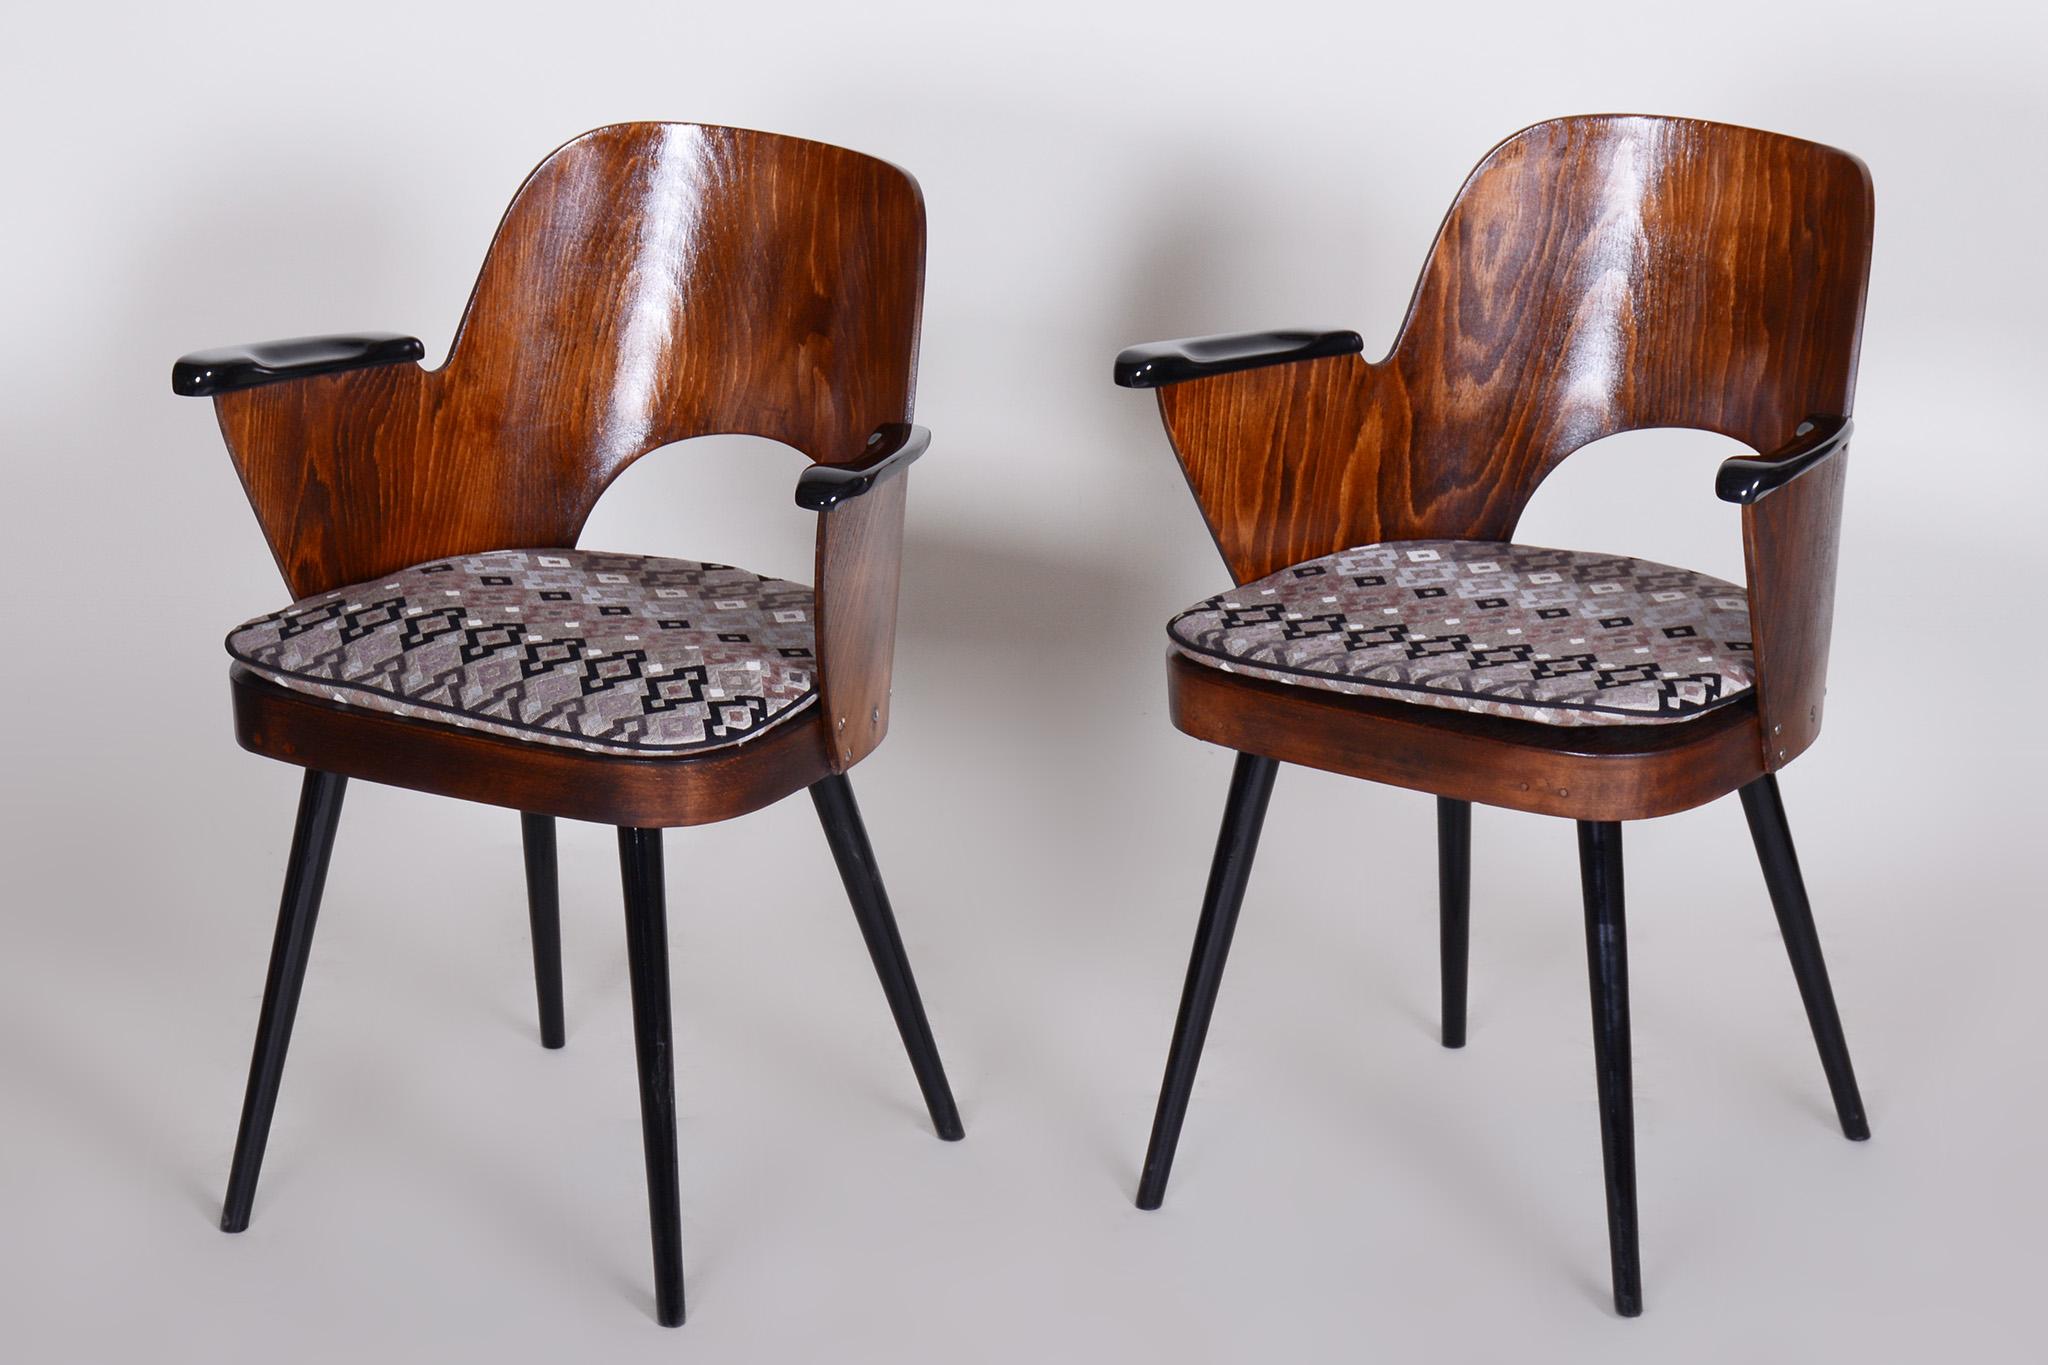 20th Century Restored Pair of Mid-Century Armchairs by Oswald Heardtl, Beech, Czechia, 1950s For Sale